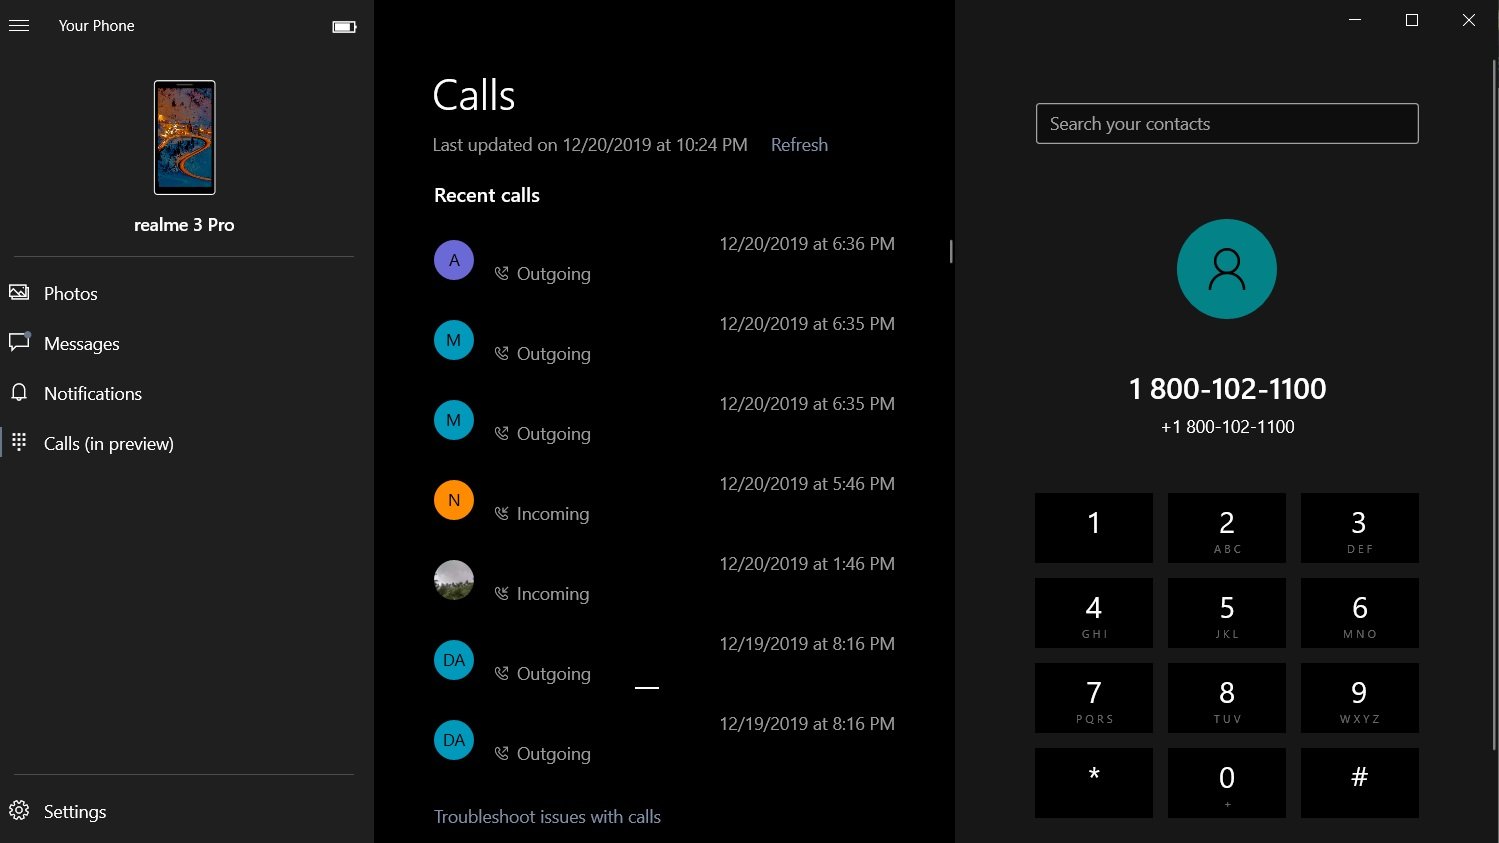 How to Place Calls From Windows 10 Using the Your Phone App